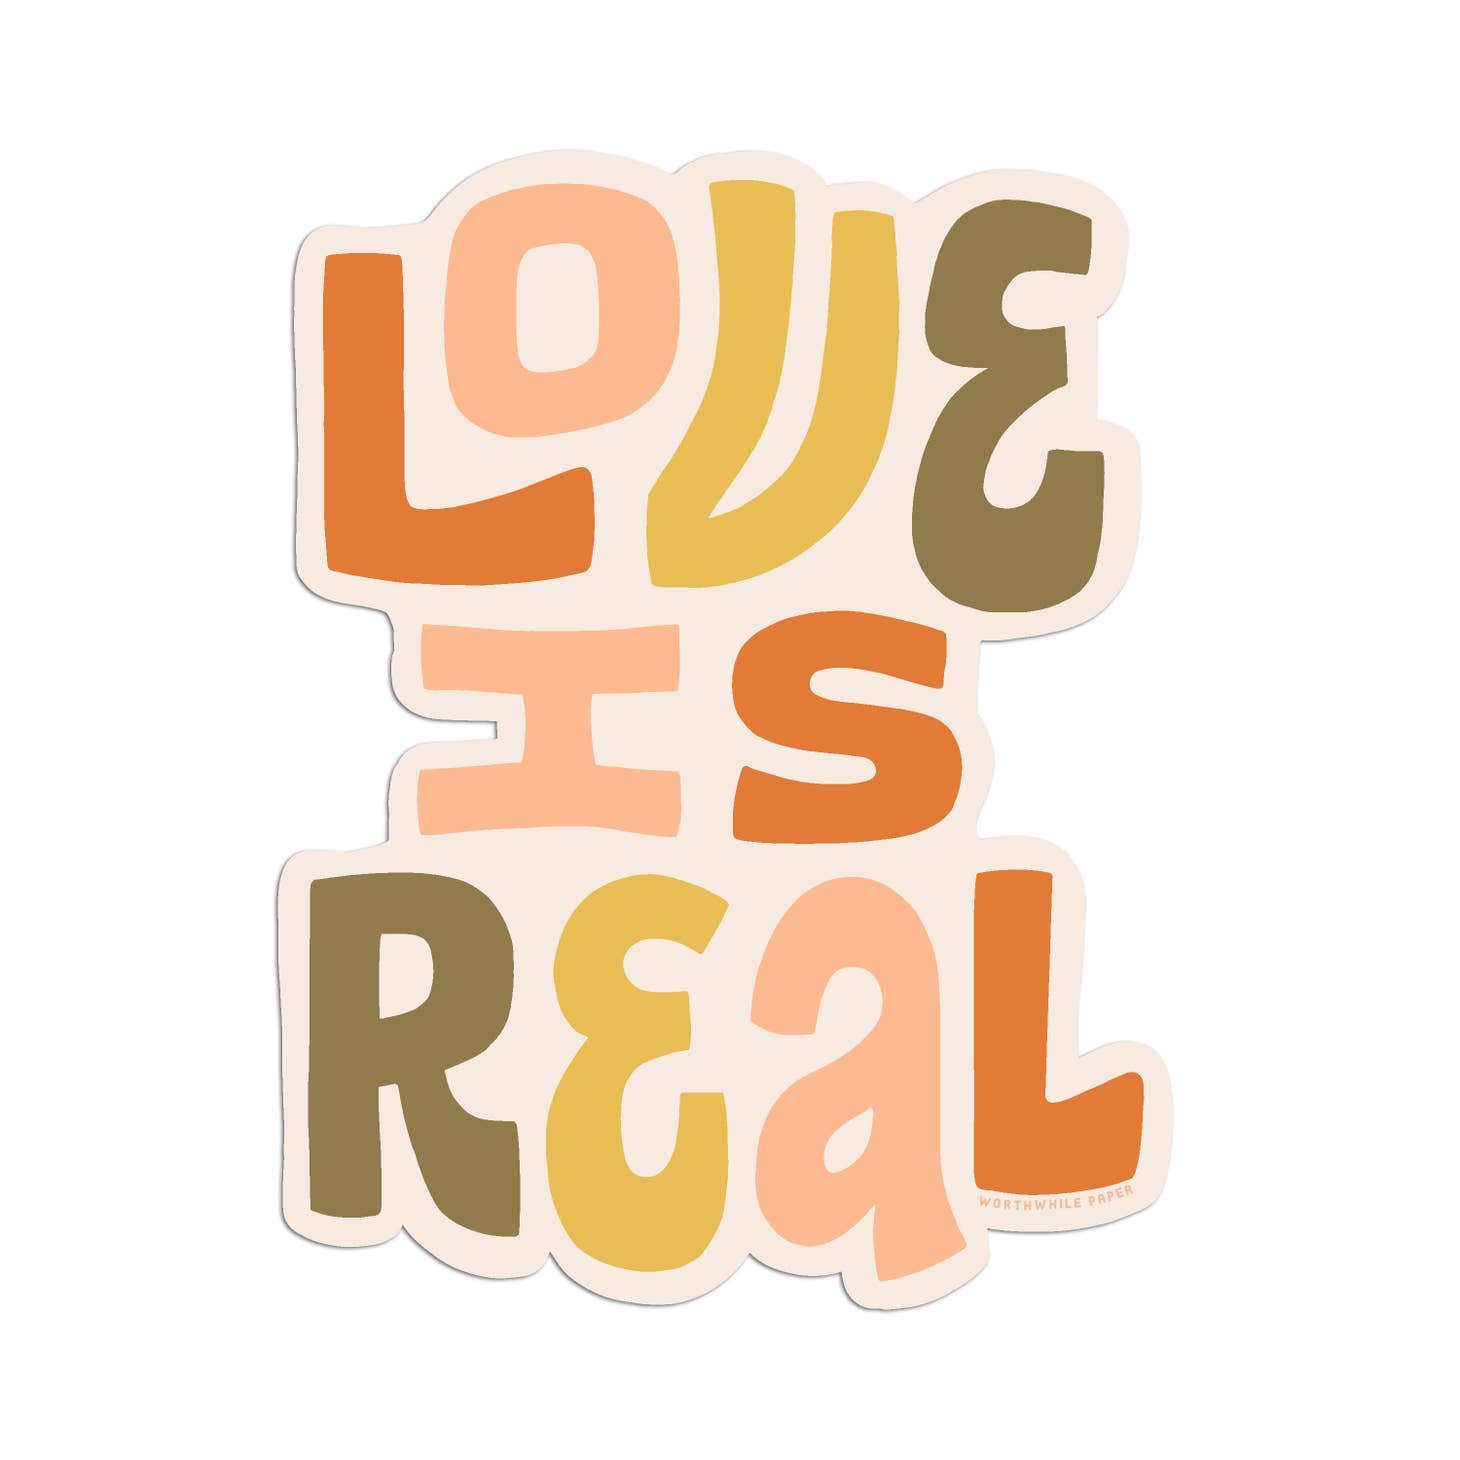 This durable vinyl sticker reminds us of how it's hard to know what's real these days, and how we know that love is. We celebrate love of all kinds, and it's universal nature.